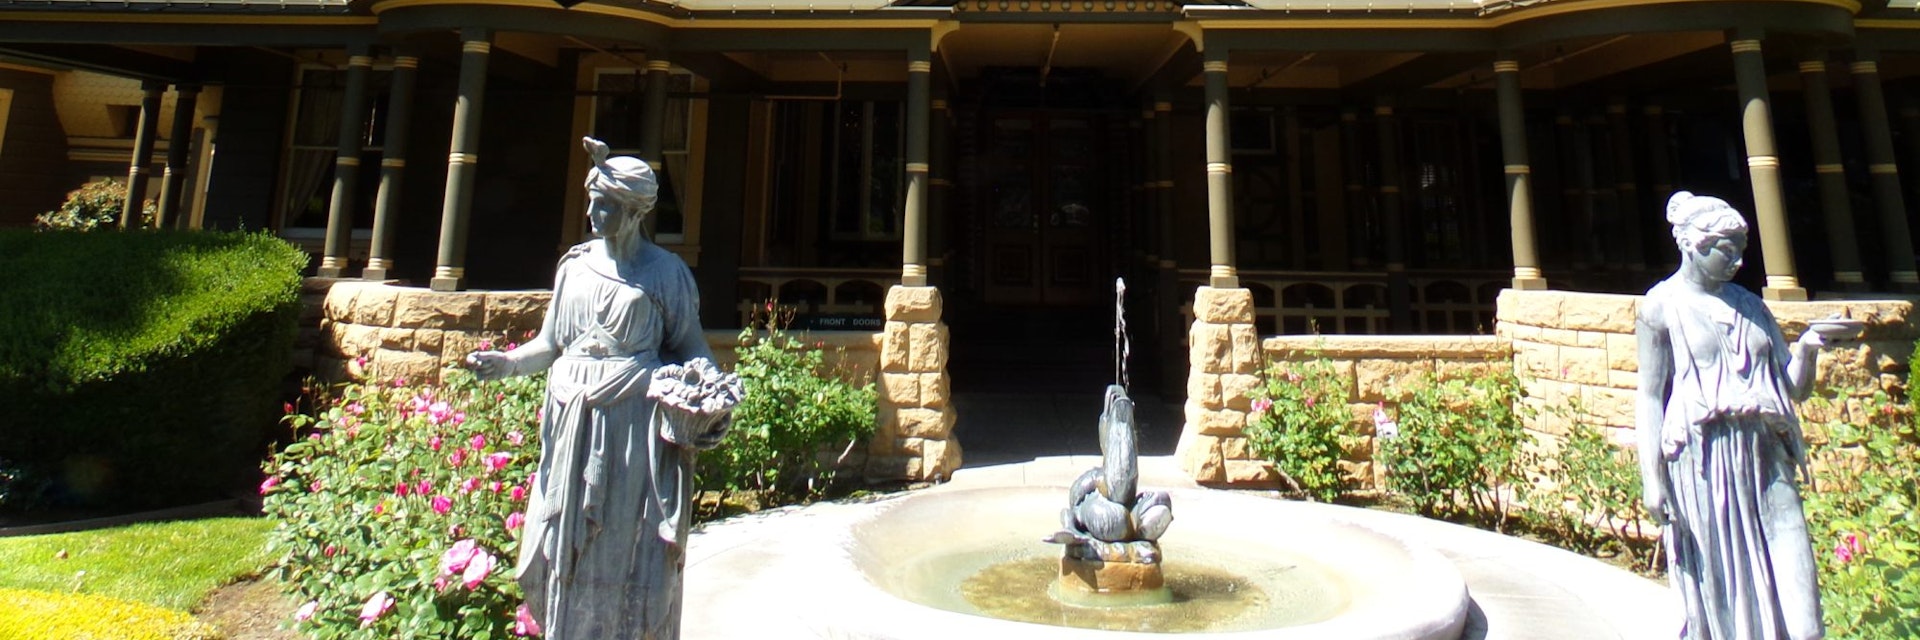 April 2, 2016: Exterior of the Winchester Mystery House with statues and a fountain.